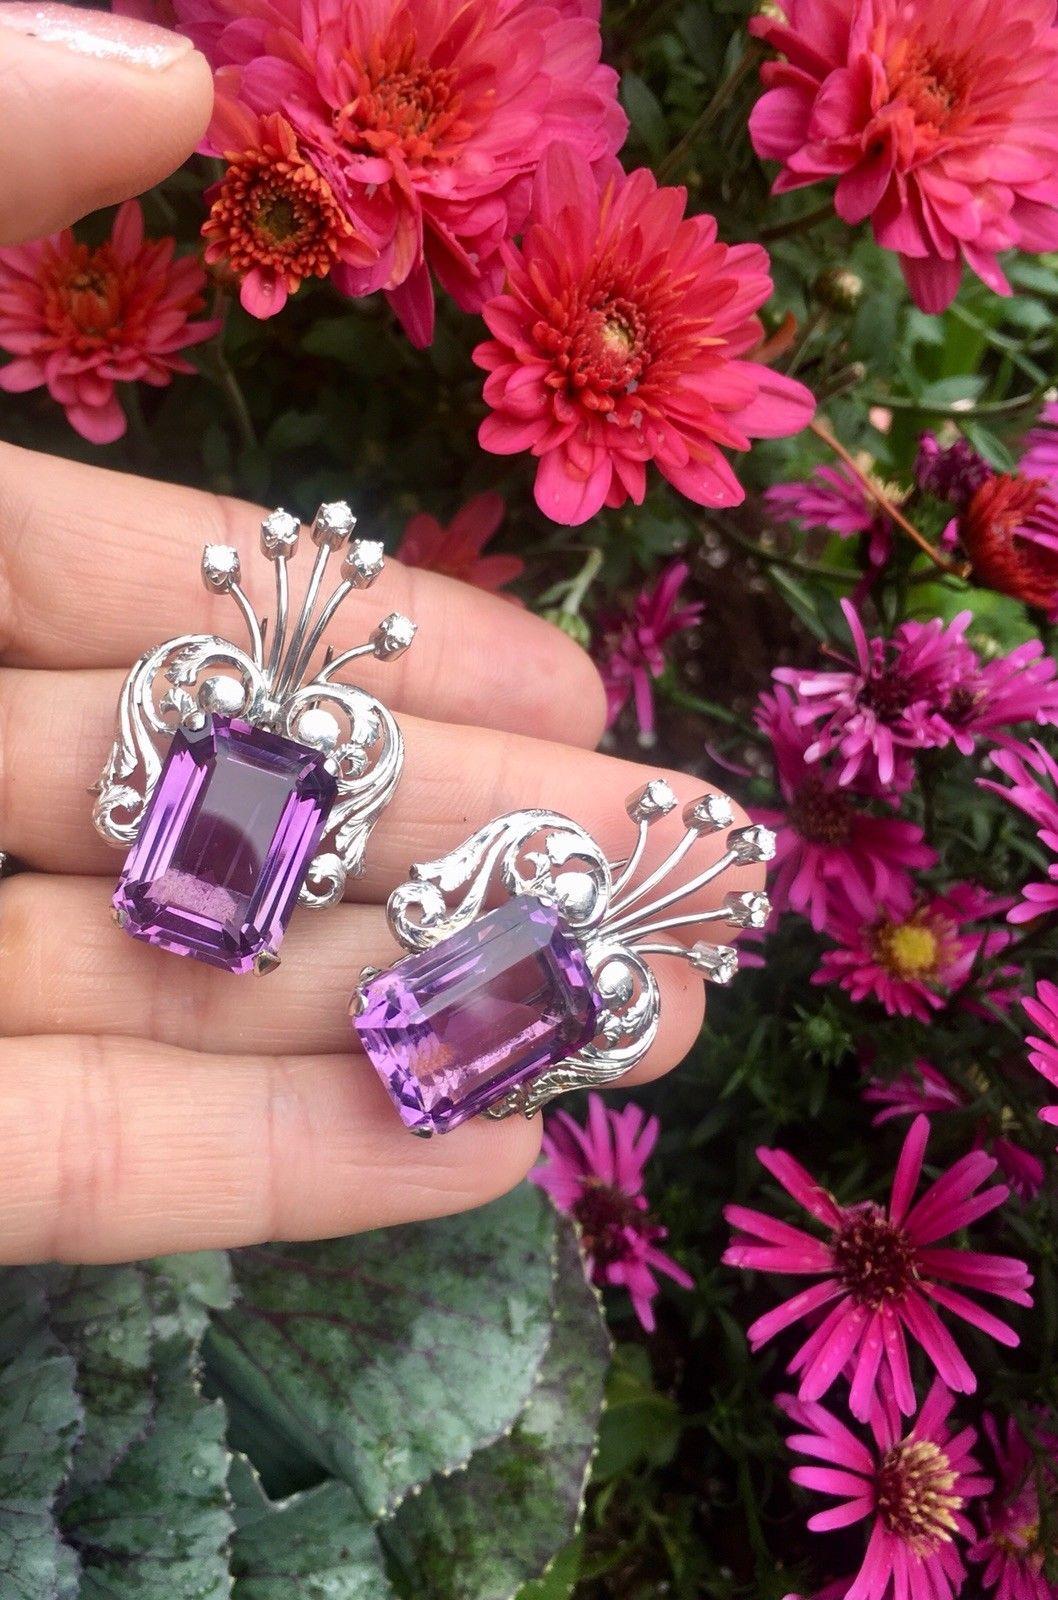 These beautiful retro double clips are set in 18 karat white gold with two outstanding emerald cut amethyst stones and high clarity diamonds.  These can be used as an accessory on a cocktail dress straps or blazer collars, and they could also be